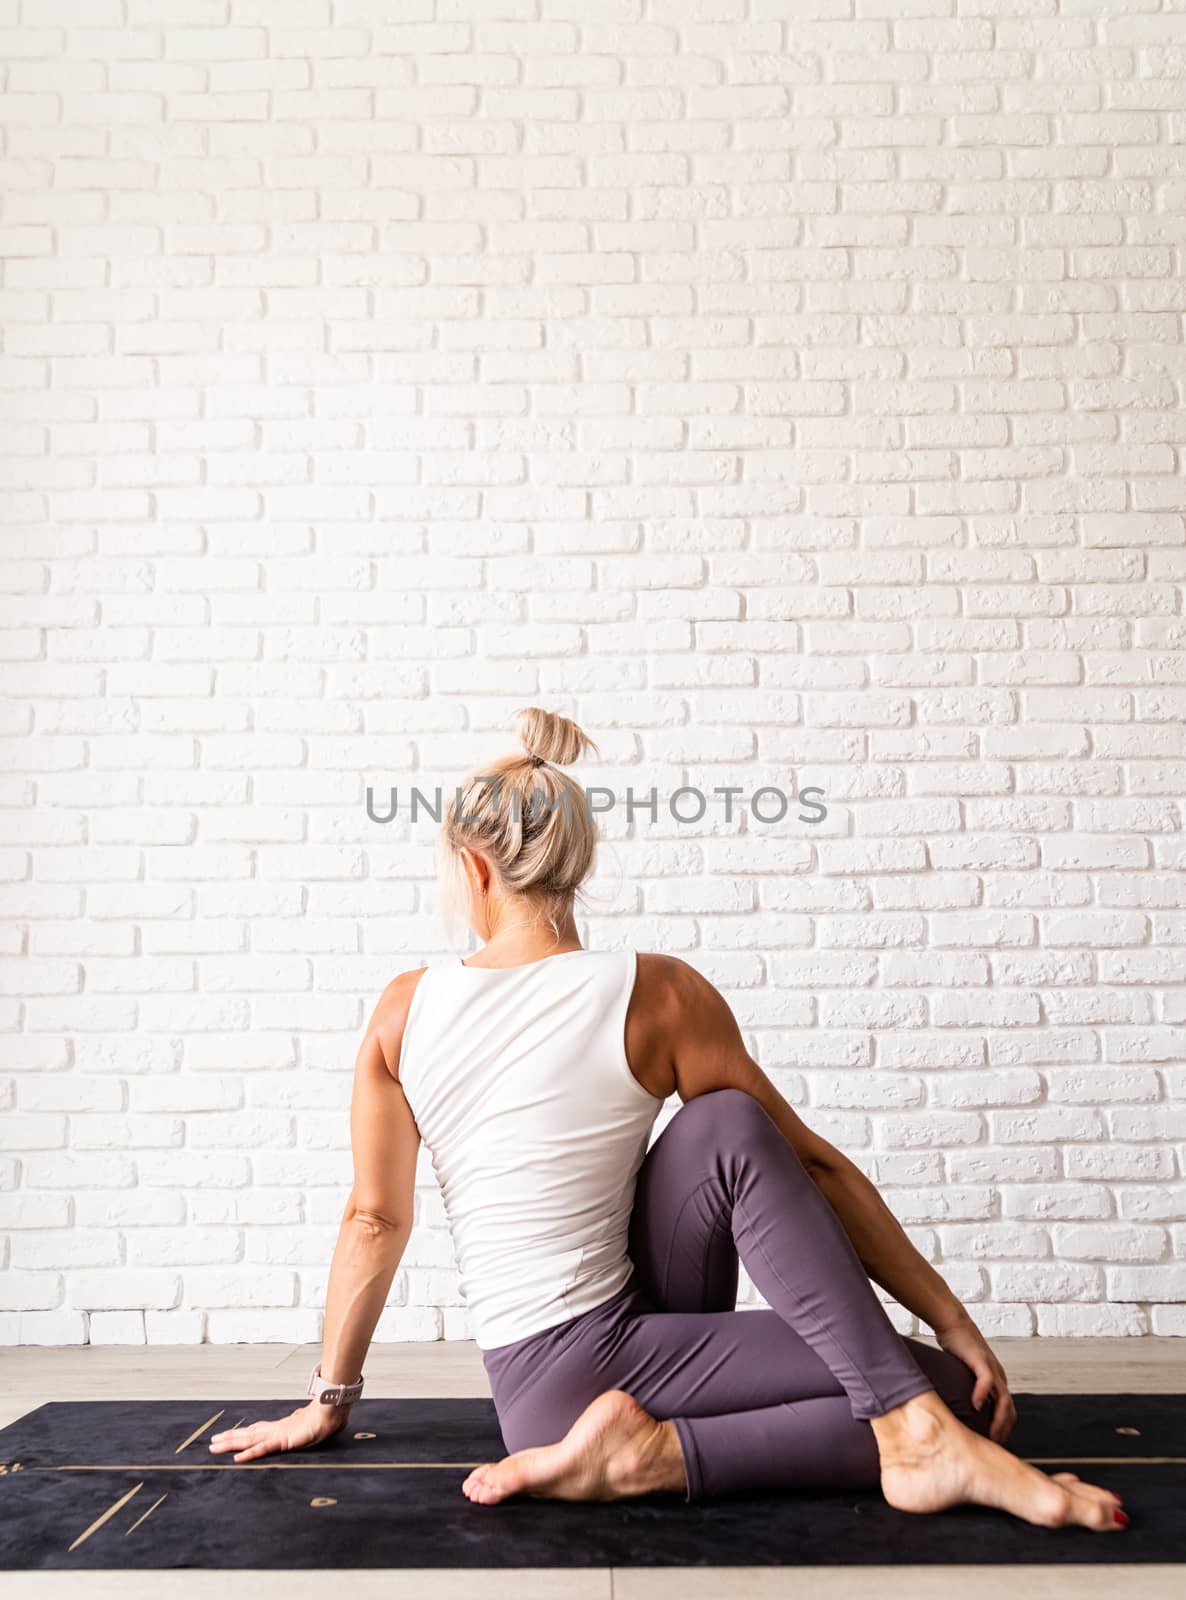 Healthy lifestyle. Young attractive woman practicing yoga, wearing sportswear, white shirt and purple pants, indoor full length, gray background